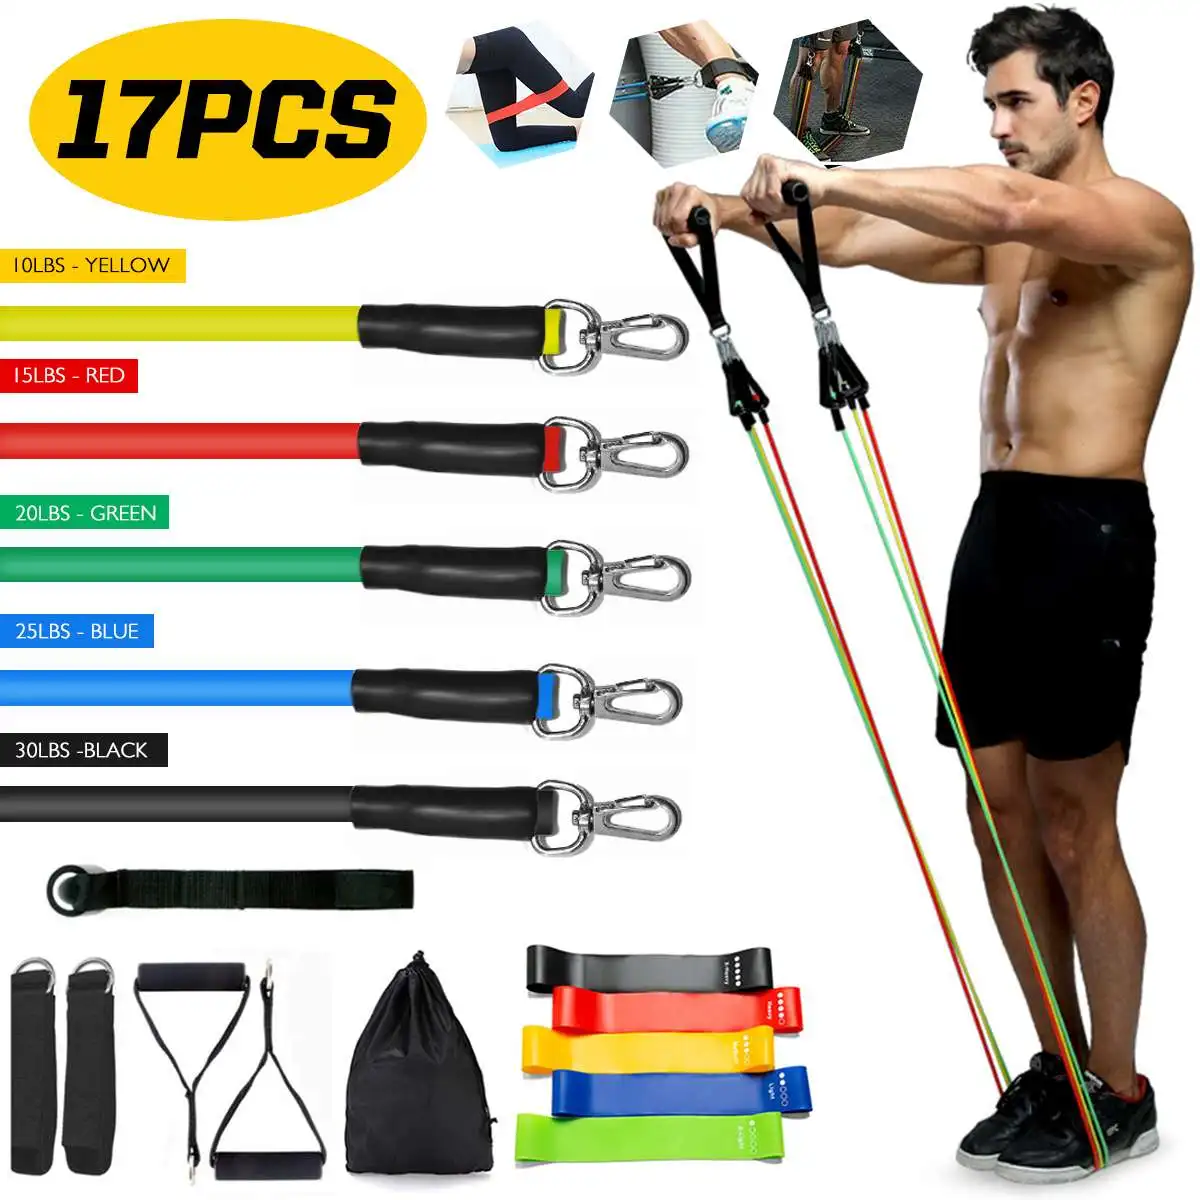 

17Pcs/Set Latex Tube Resistance Bands with Door Anchor Fitness Pull Rope Elastic Gym Expander Muscle Strength Training Equipment